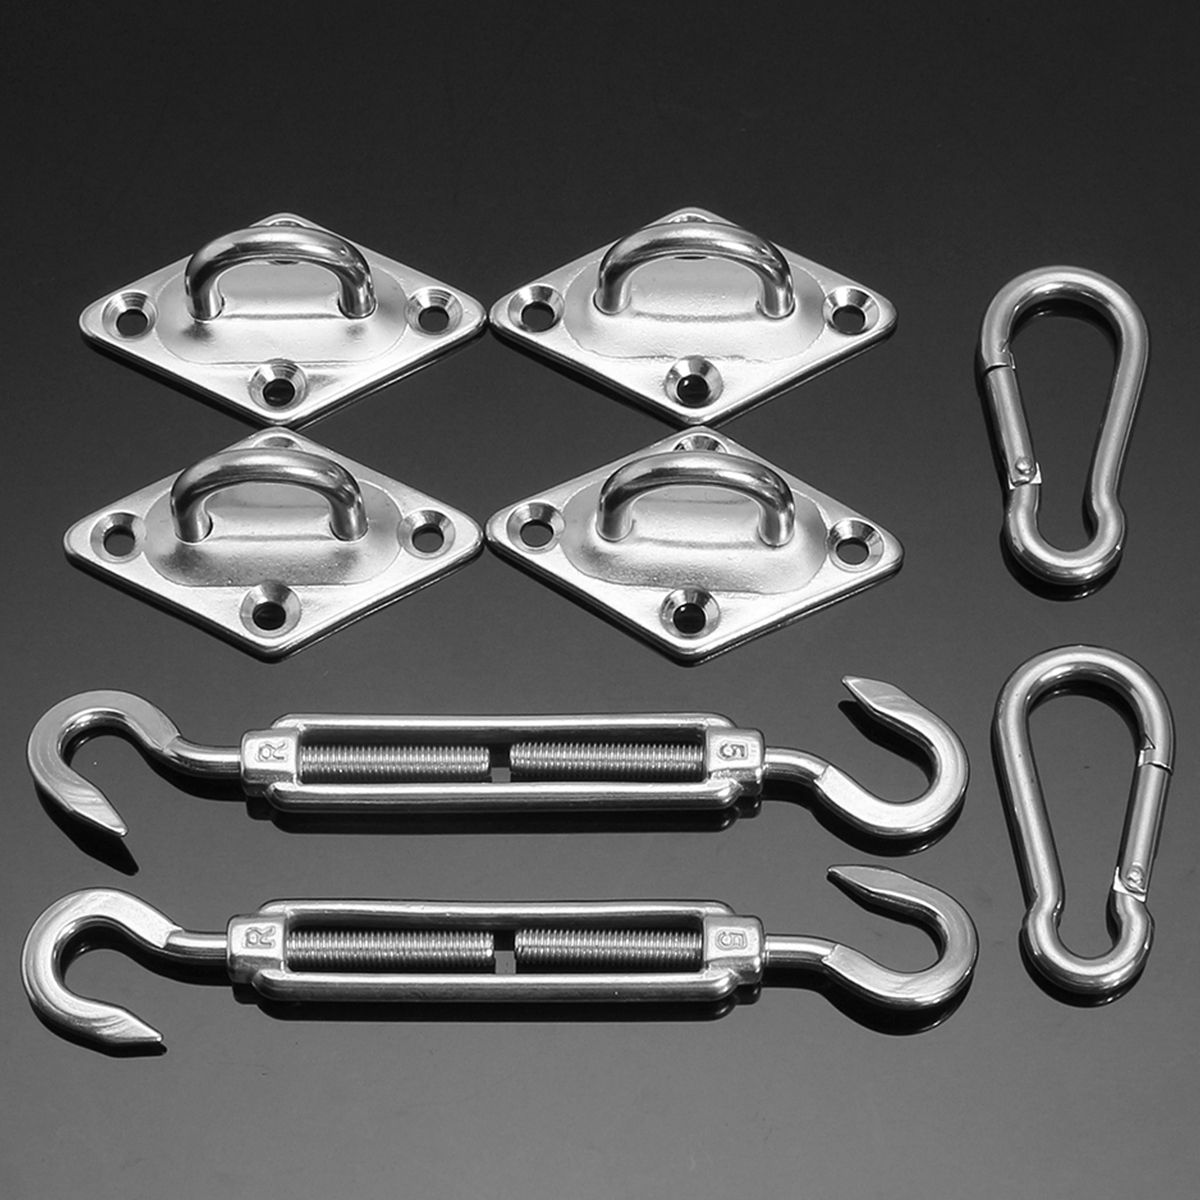 8Pcs-Stainless-Steel-Outdoor-Sun-Sail-Shade-Canopy-DIY-Fixing-Fittings-Hardware-Accessory-Tools-Kit-1318407